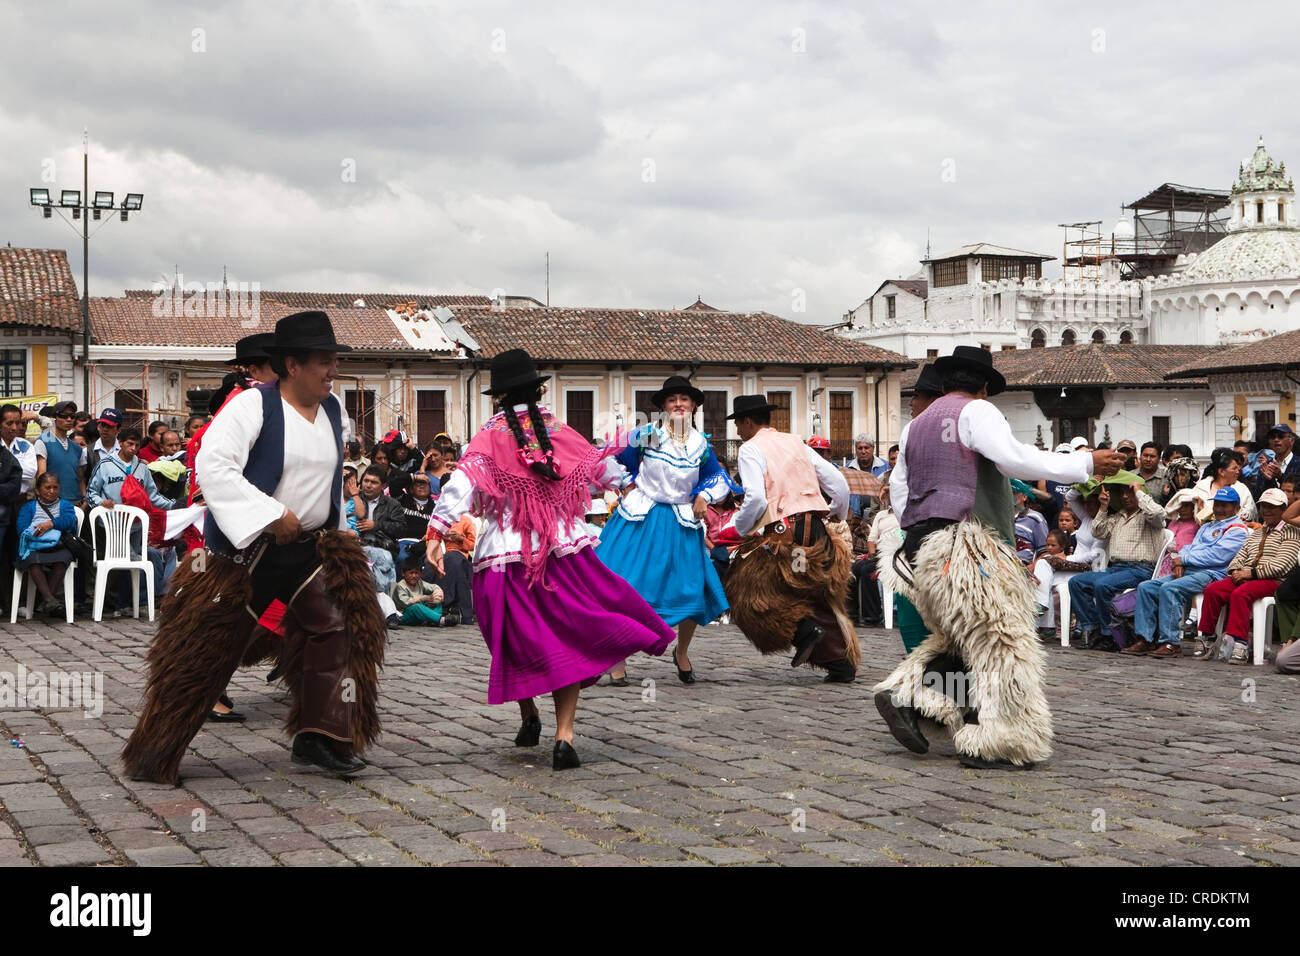 Costume dance groups on the Plaza San Francisco during a car-free Sunday in the historic town centre of Quito, Ecuador Stock Photo